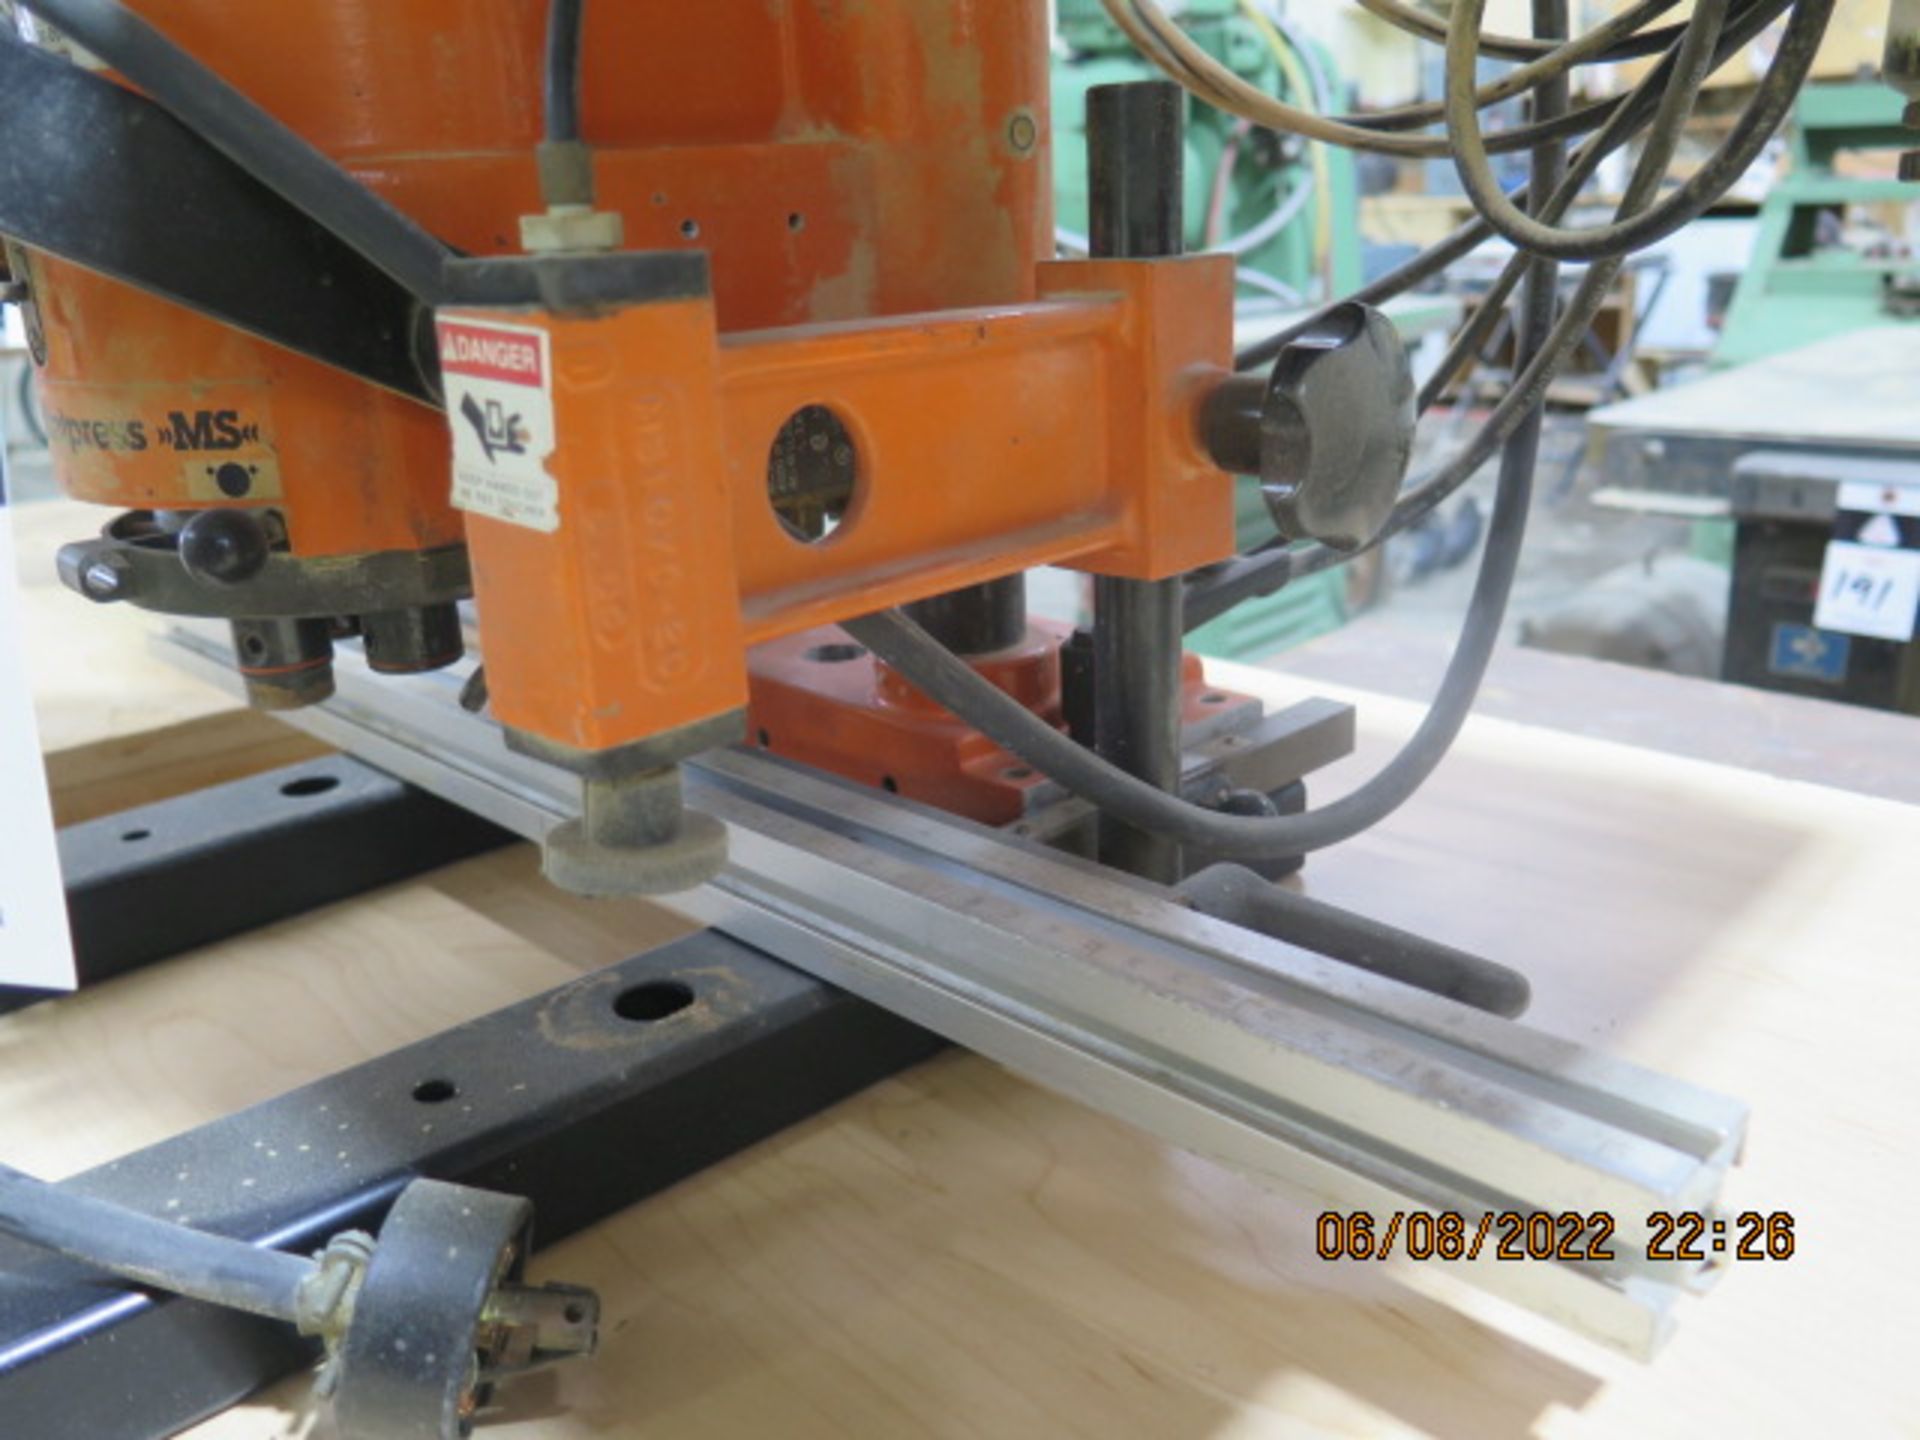 Blum mdl. M51N1004 “Mini Press” Hinge Router (SOLD AS-IS - NO WARRANTY) - Image 5 of 7